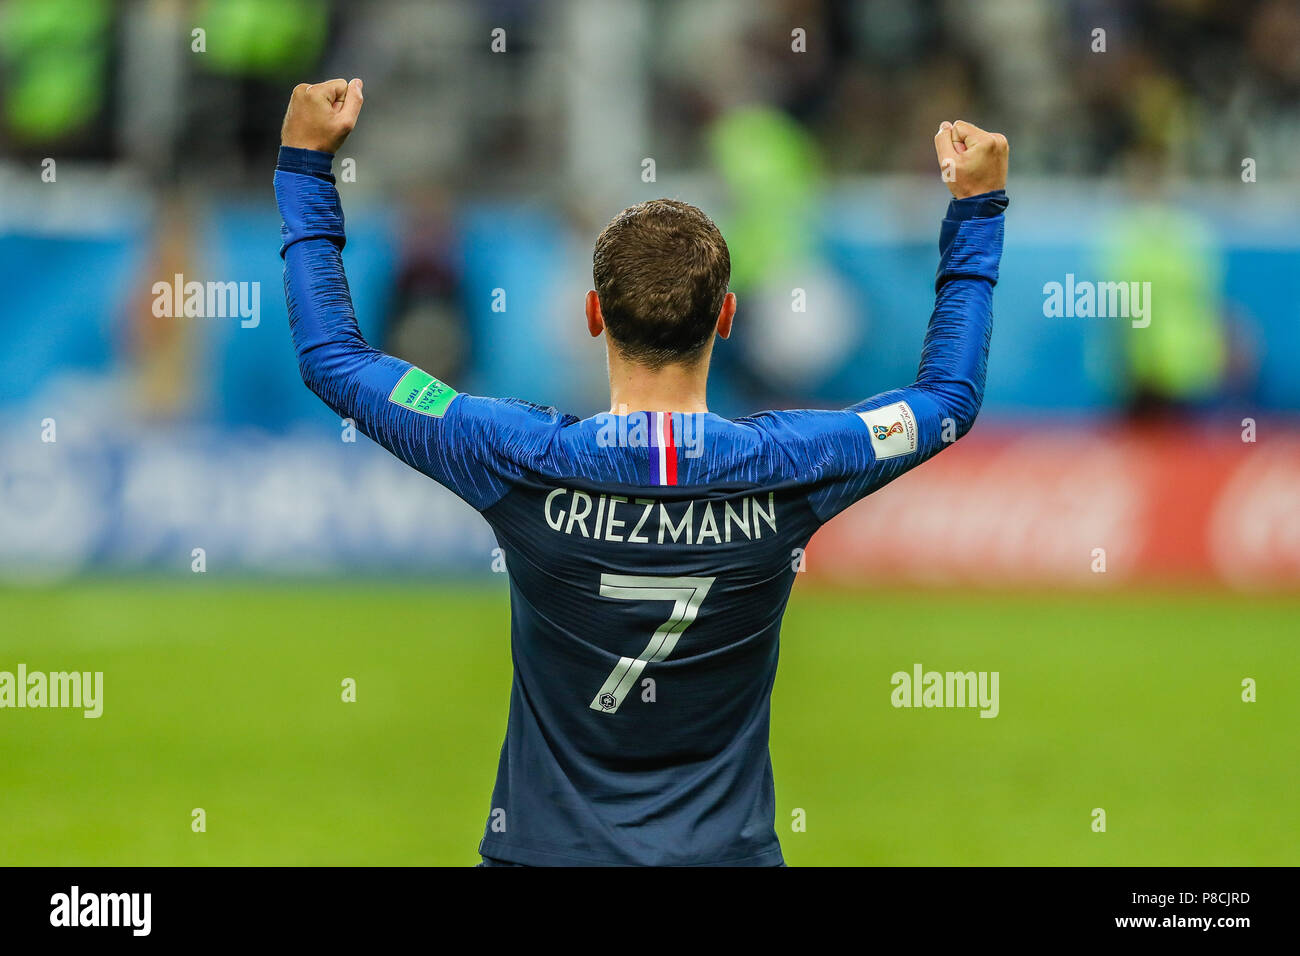 St. Petersburg, Russia. 10th July 2018. Antoine Griezmann of France during match against Belgium valid for the semi-finals of the Glass of the World of Russia in the Stadium St Petersburg in the city of Saint Petersburg in Russia on Tuesday, 10 (Photo: William Volcov / Brazil Photo Press) Credit: Brazil Photo Press/Alamy Live News Stock Photo